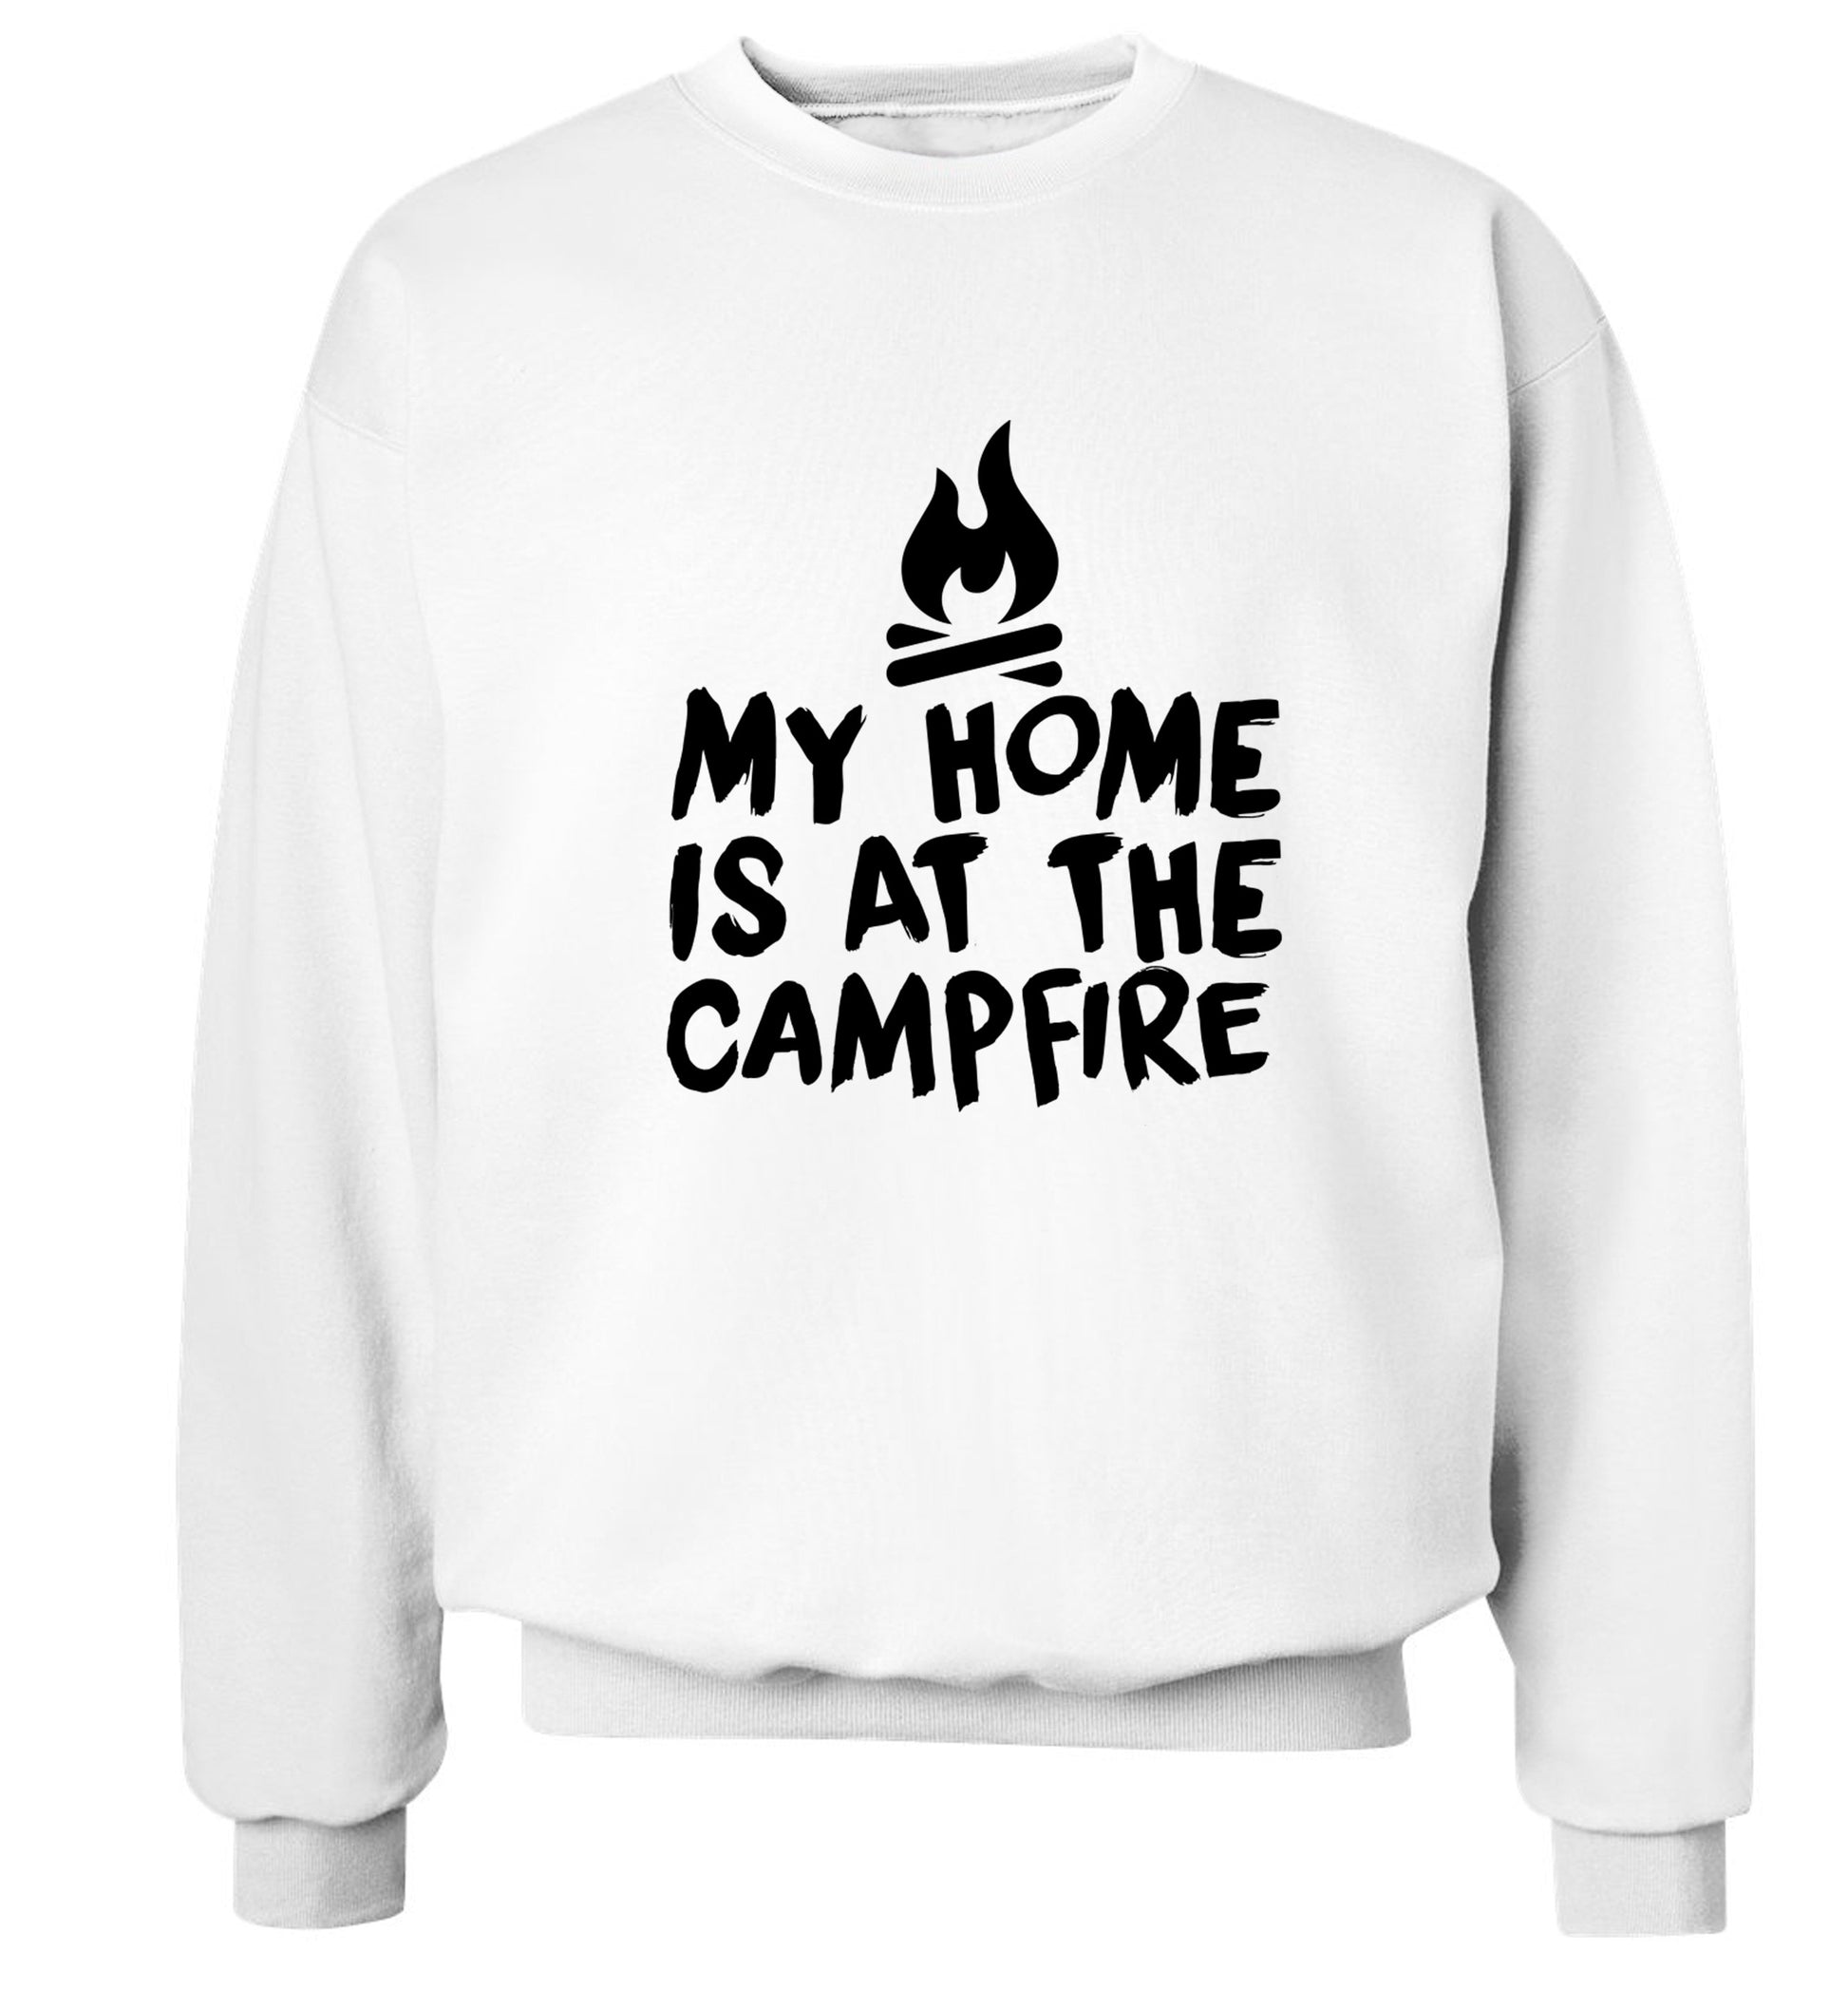 My home is at the campfire Adult's unisex white Sweater 2XL